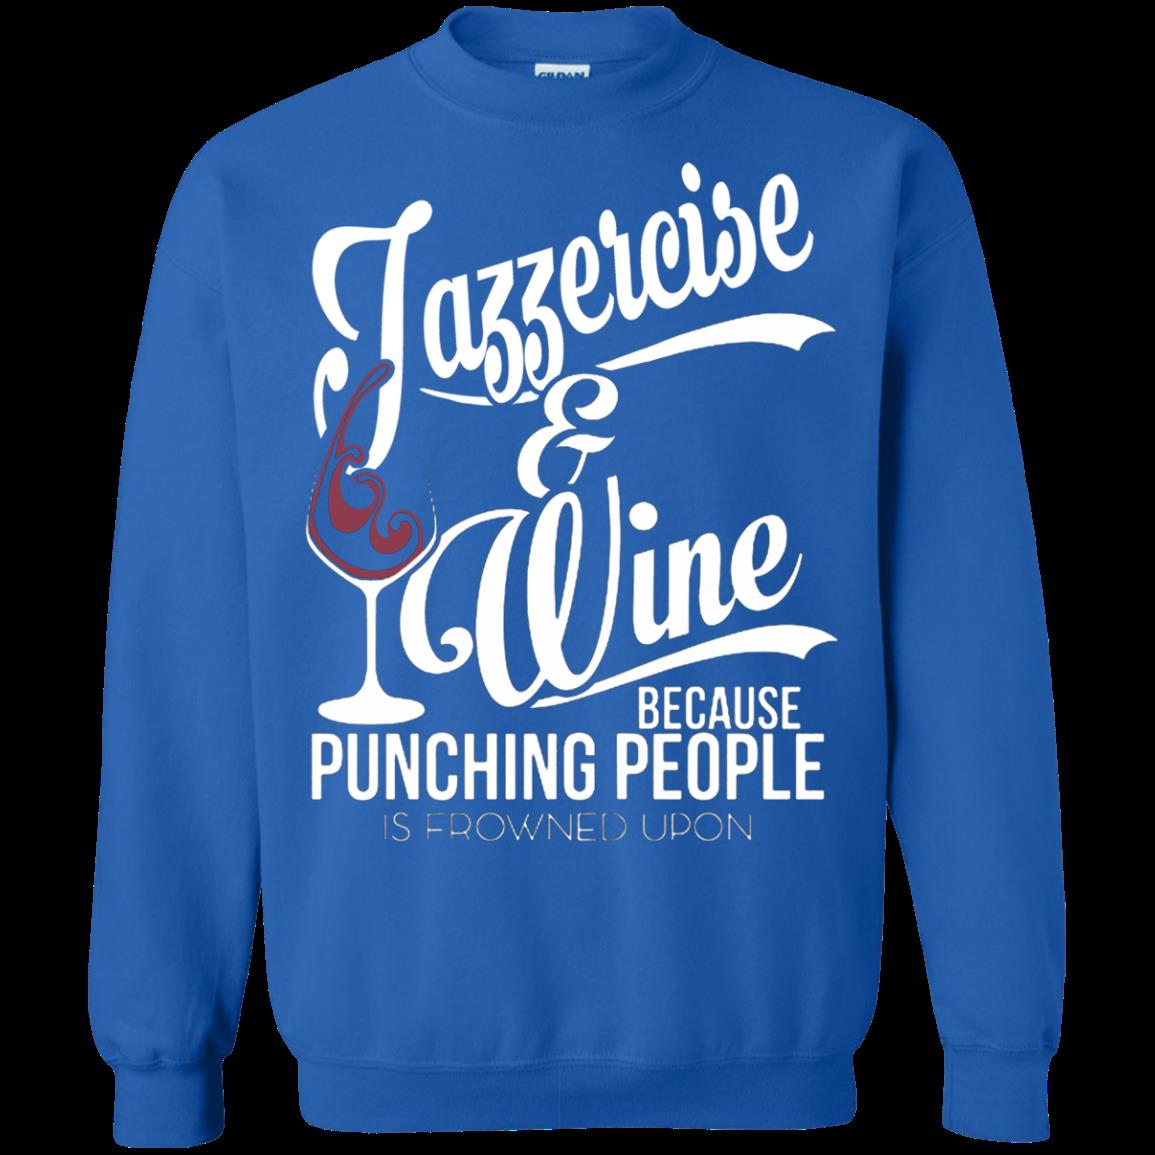 Jazzercise Wine Shirts Because Punching People Is Frowned Upon